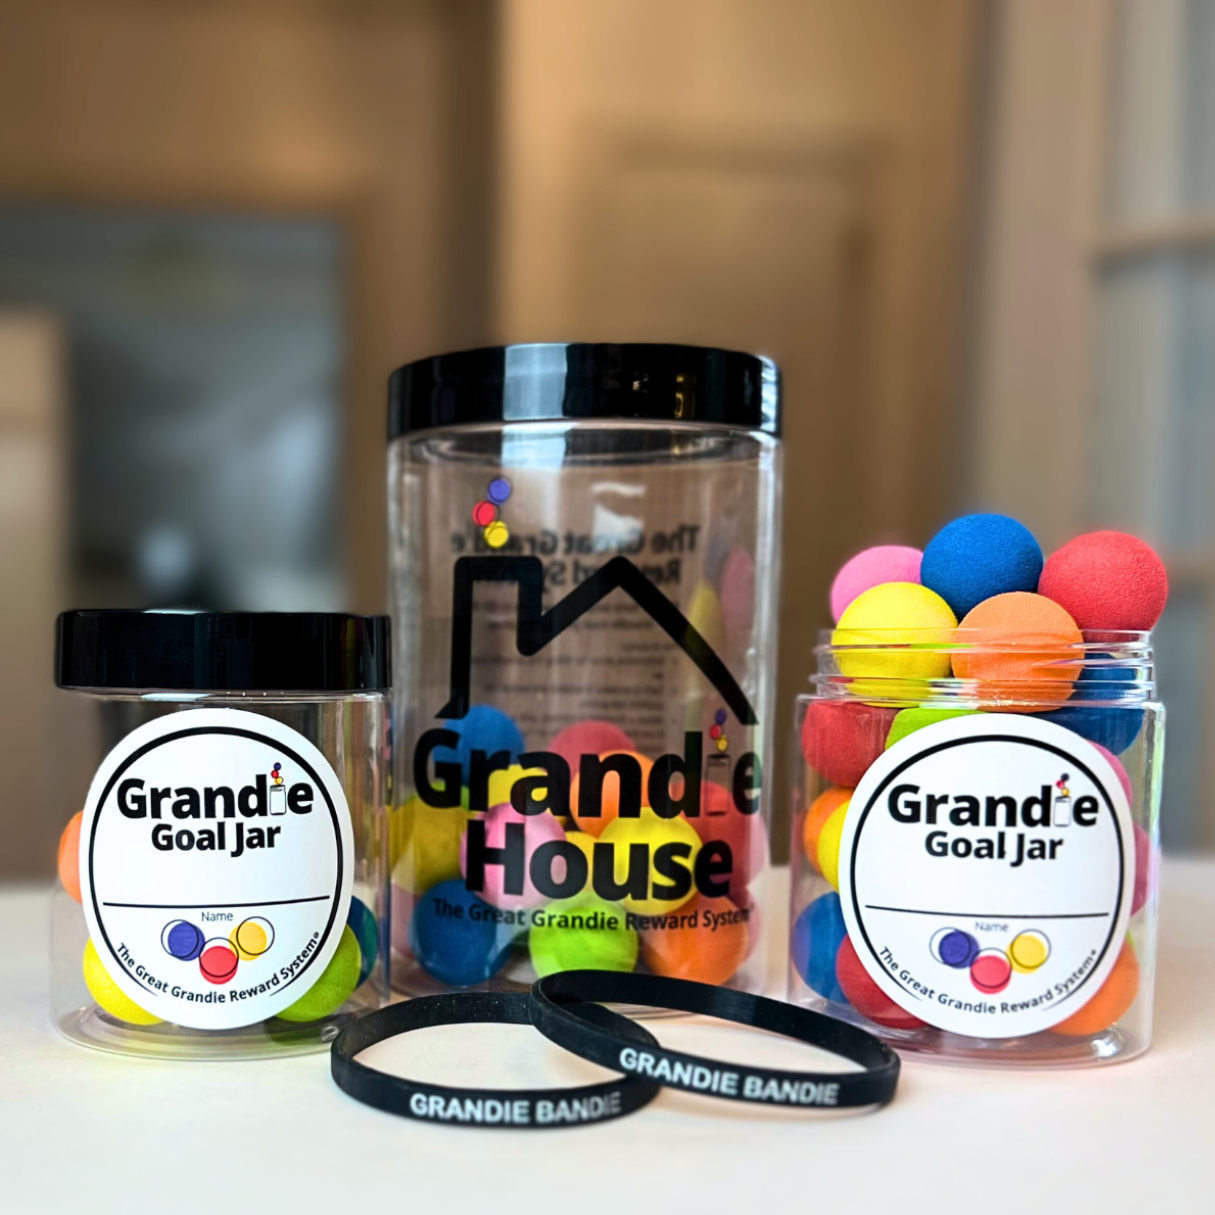 The Great Grandie Reward System includes 2 Grandie Goal Jars, Grandies, 2 Grandie Bandies, 1 Grandie House, and more